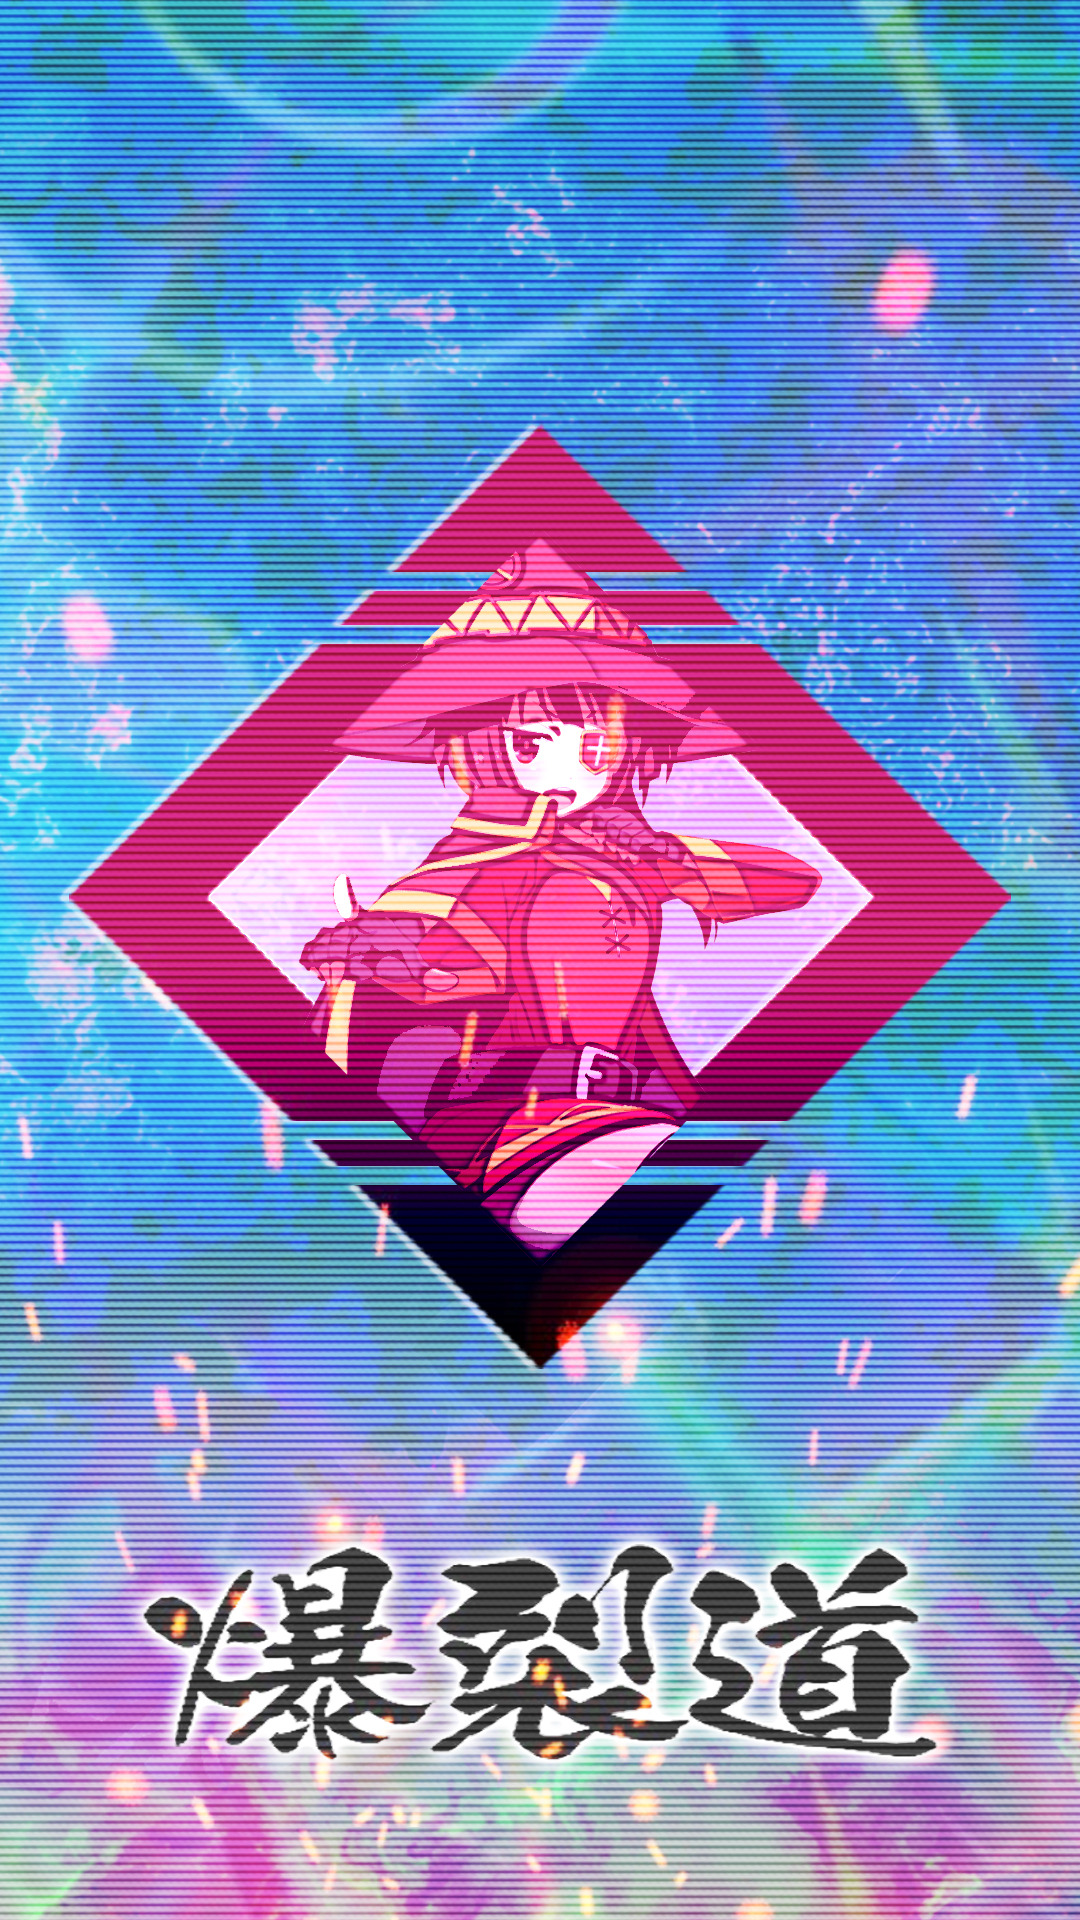 Phone Version Of The Meguwave Wallpaper Since Someone - Vaporwave Aesthetic Anime Wallpaper Iphone - HD Wallpaper 